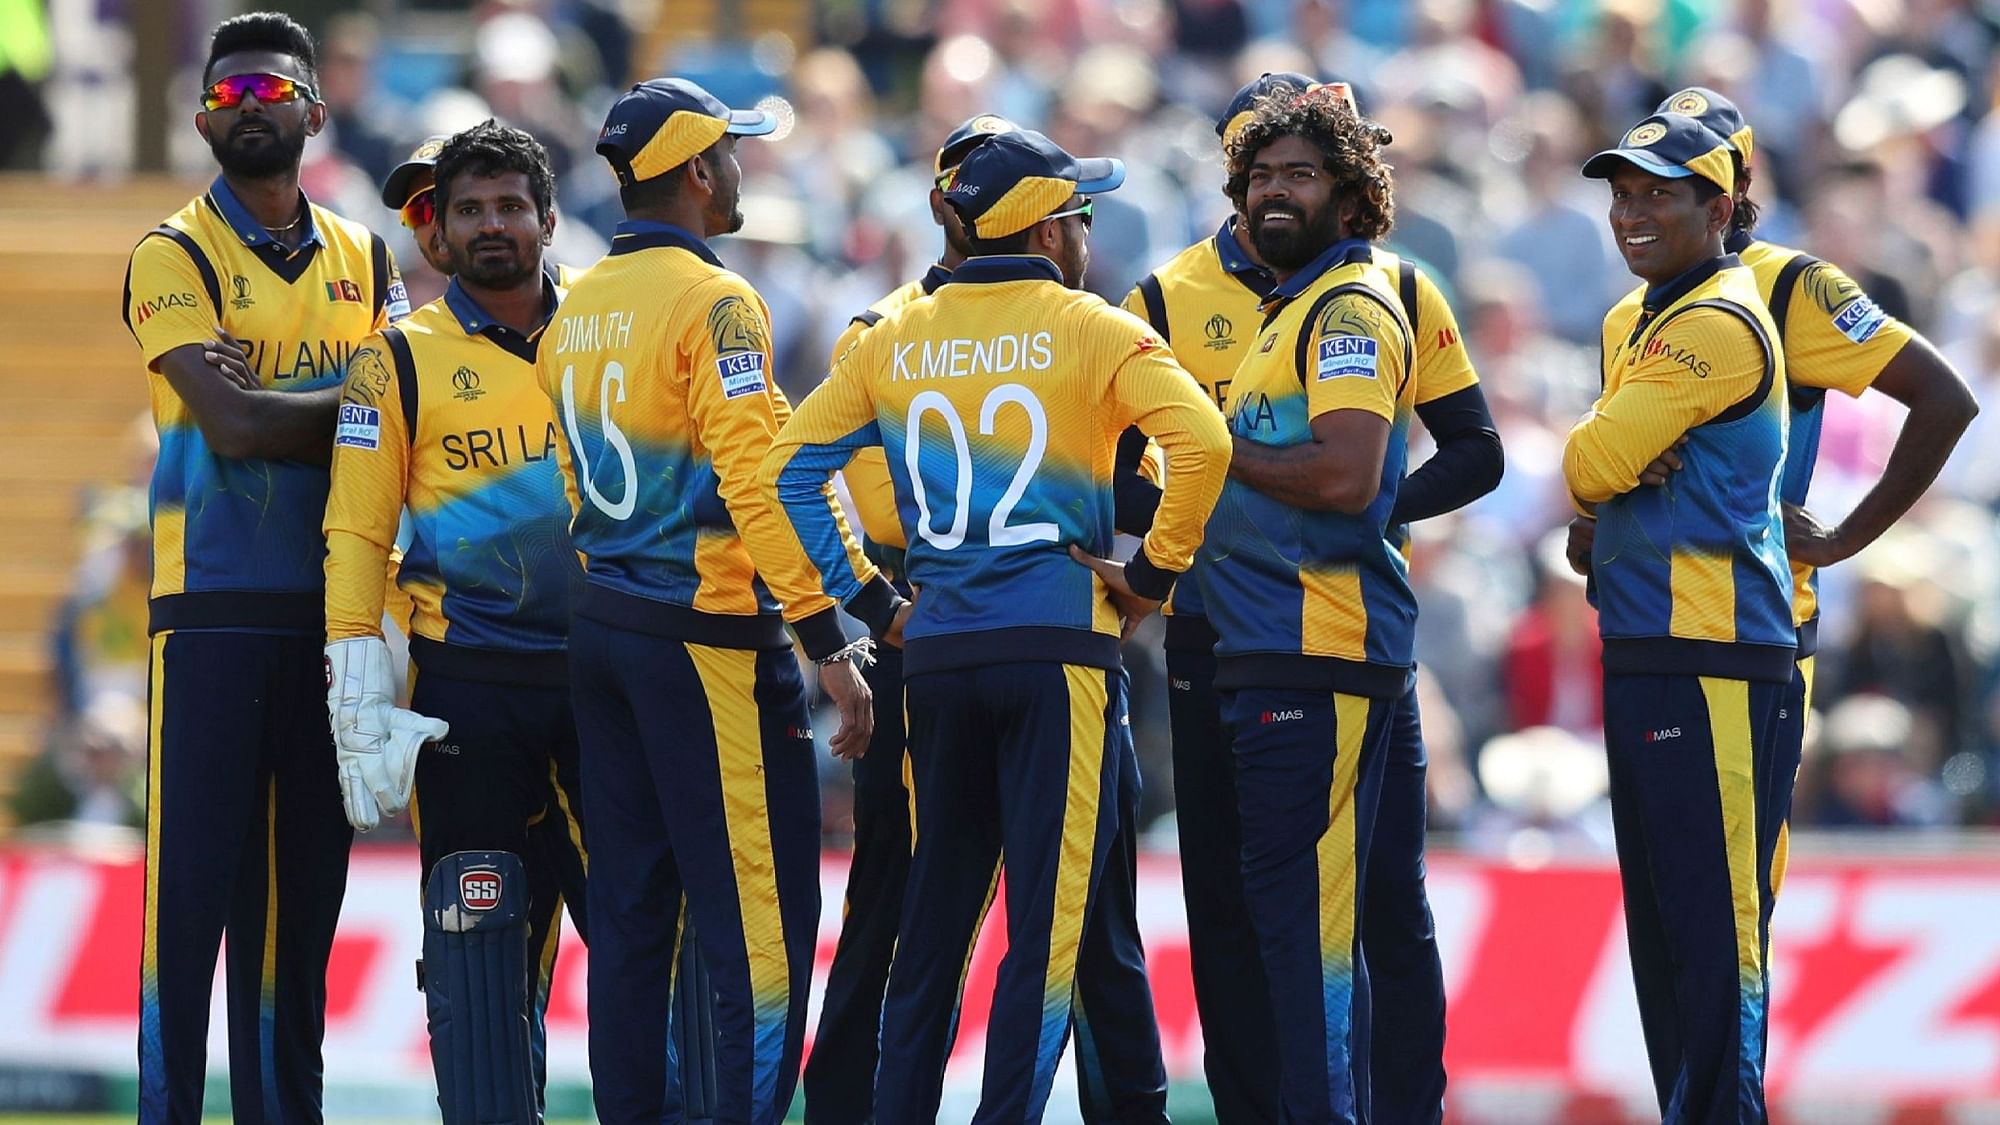 Sri Lankan have registered their second win in this World Cup.